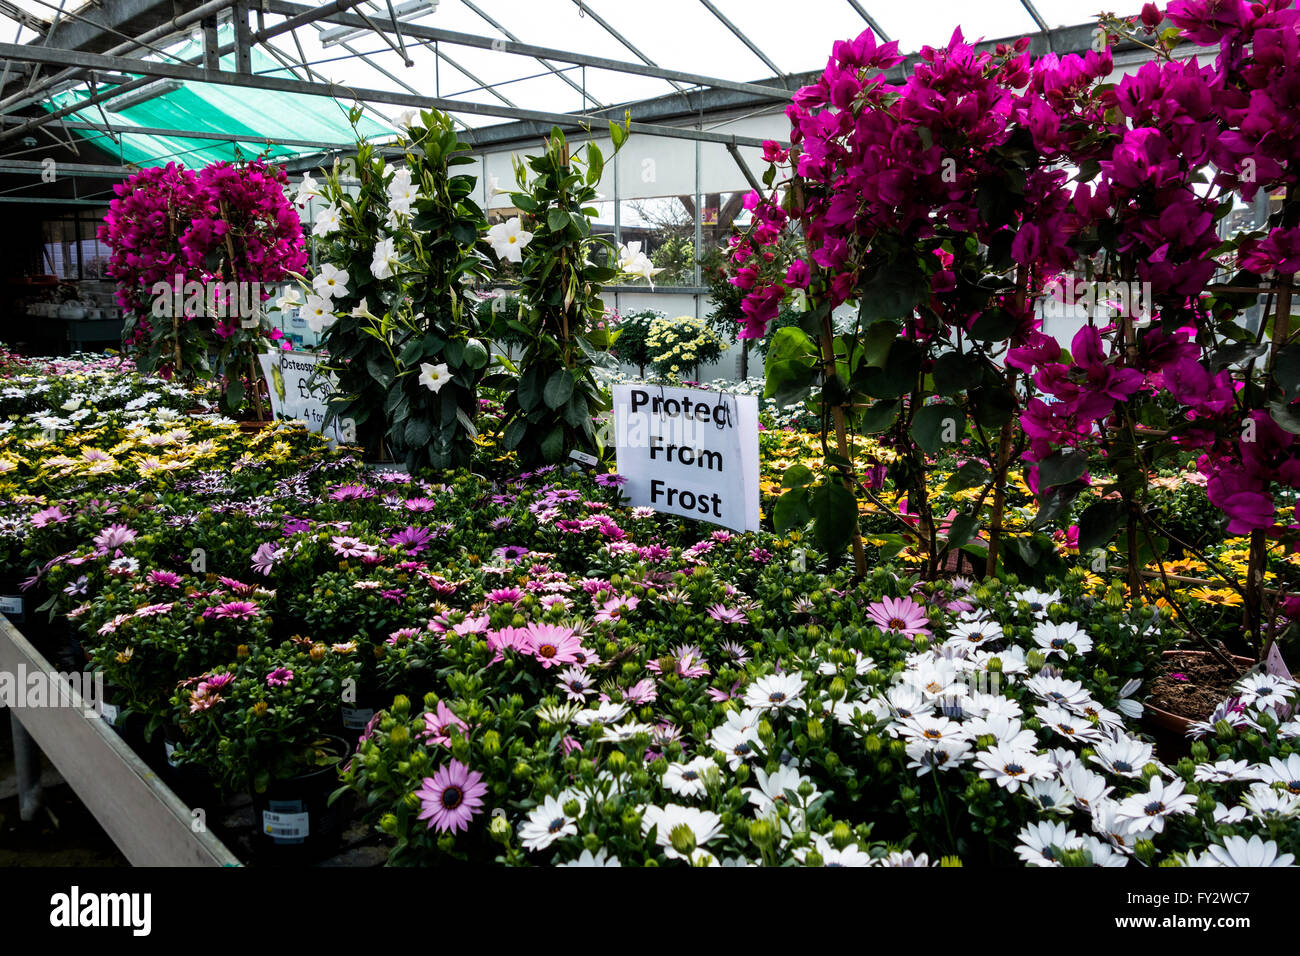 Garden centre in early spring, showing protect from frost signs. Stock Photo